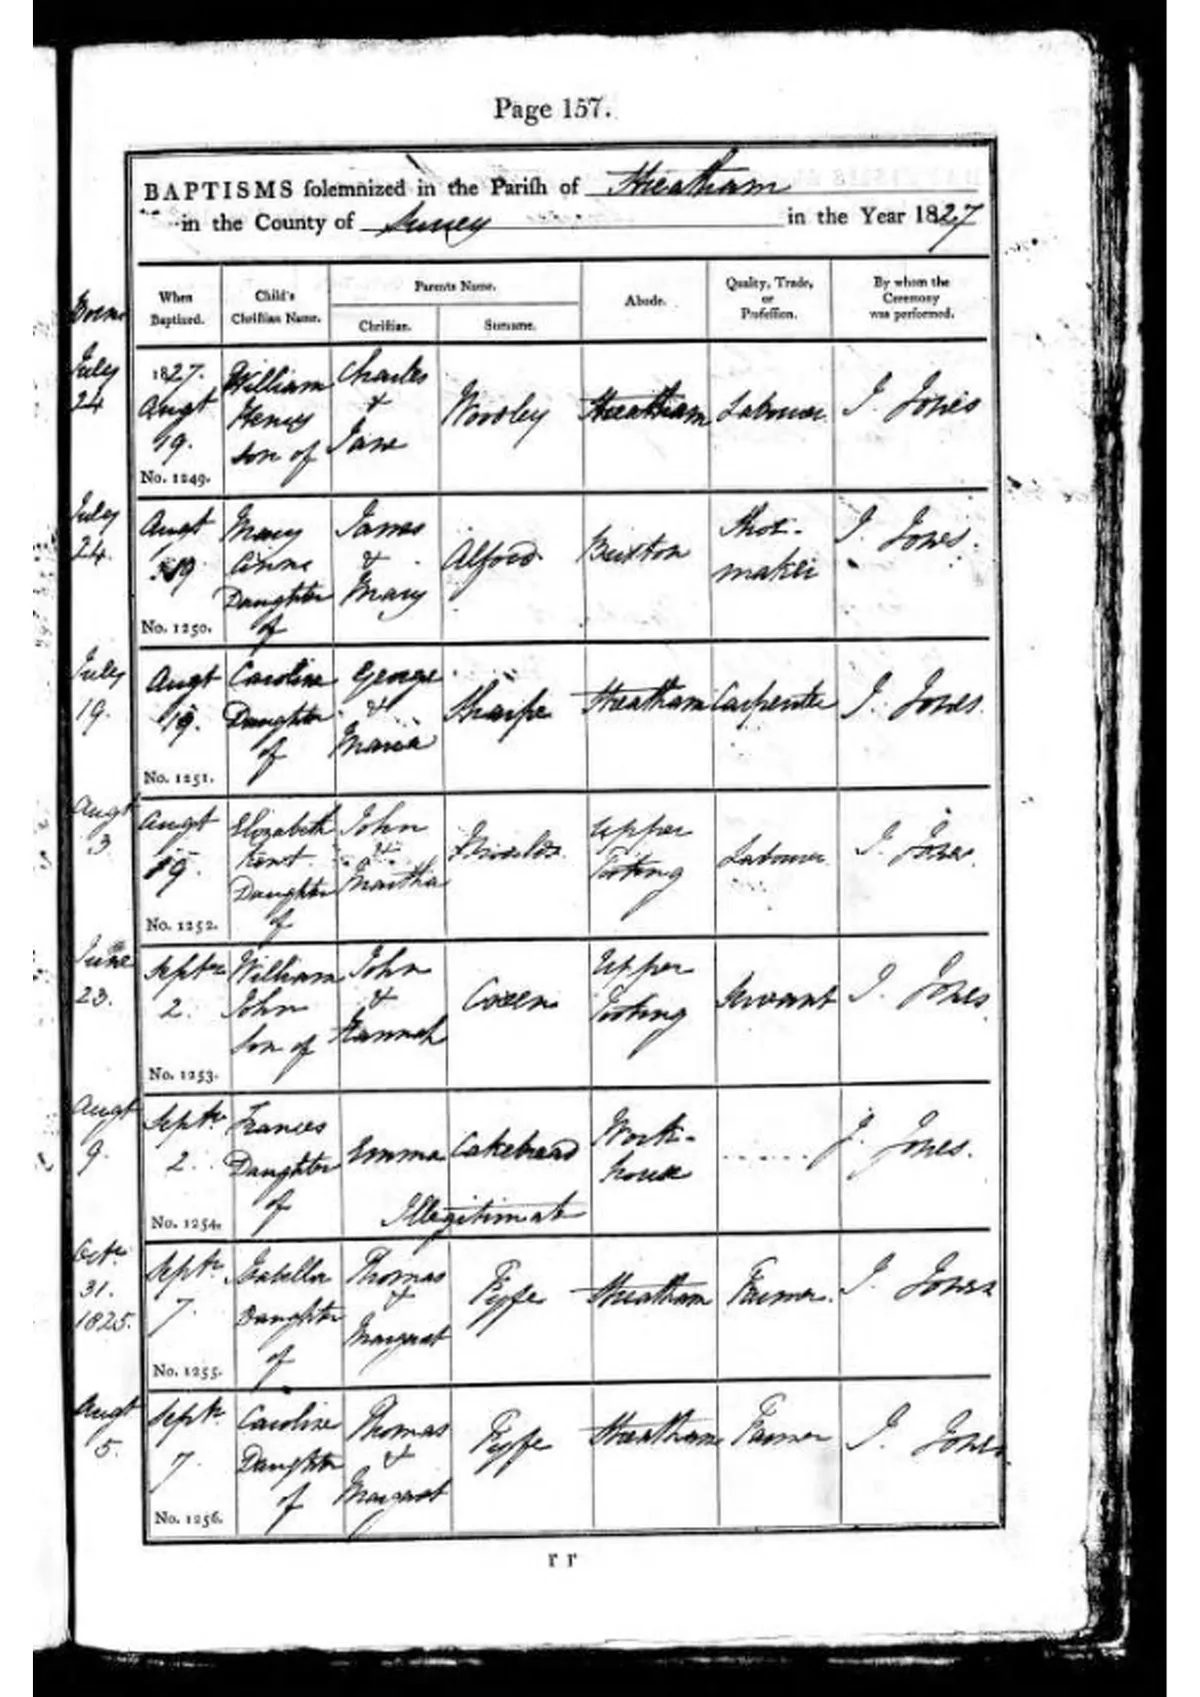  This 1827 baptism records list from London shows the father's profession